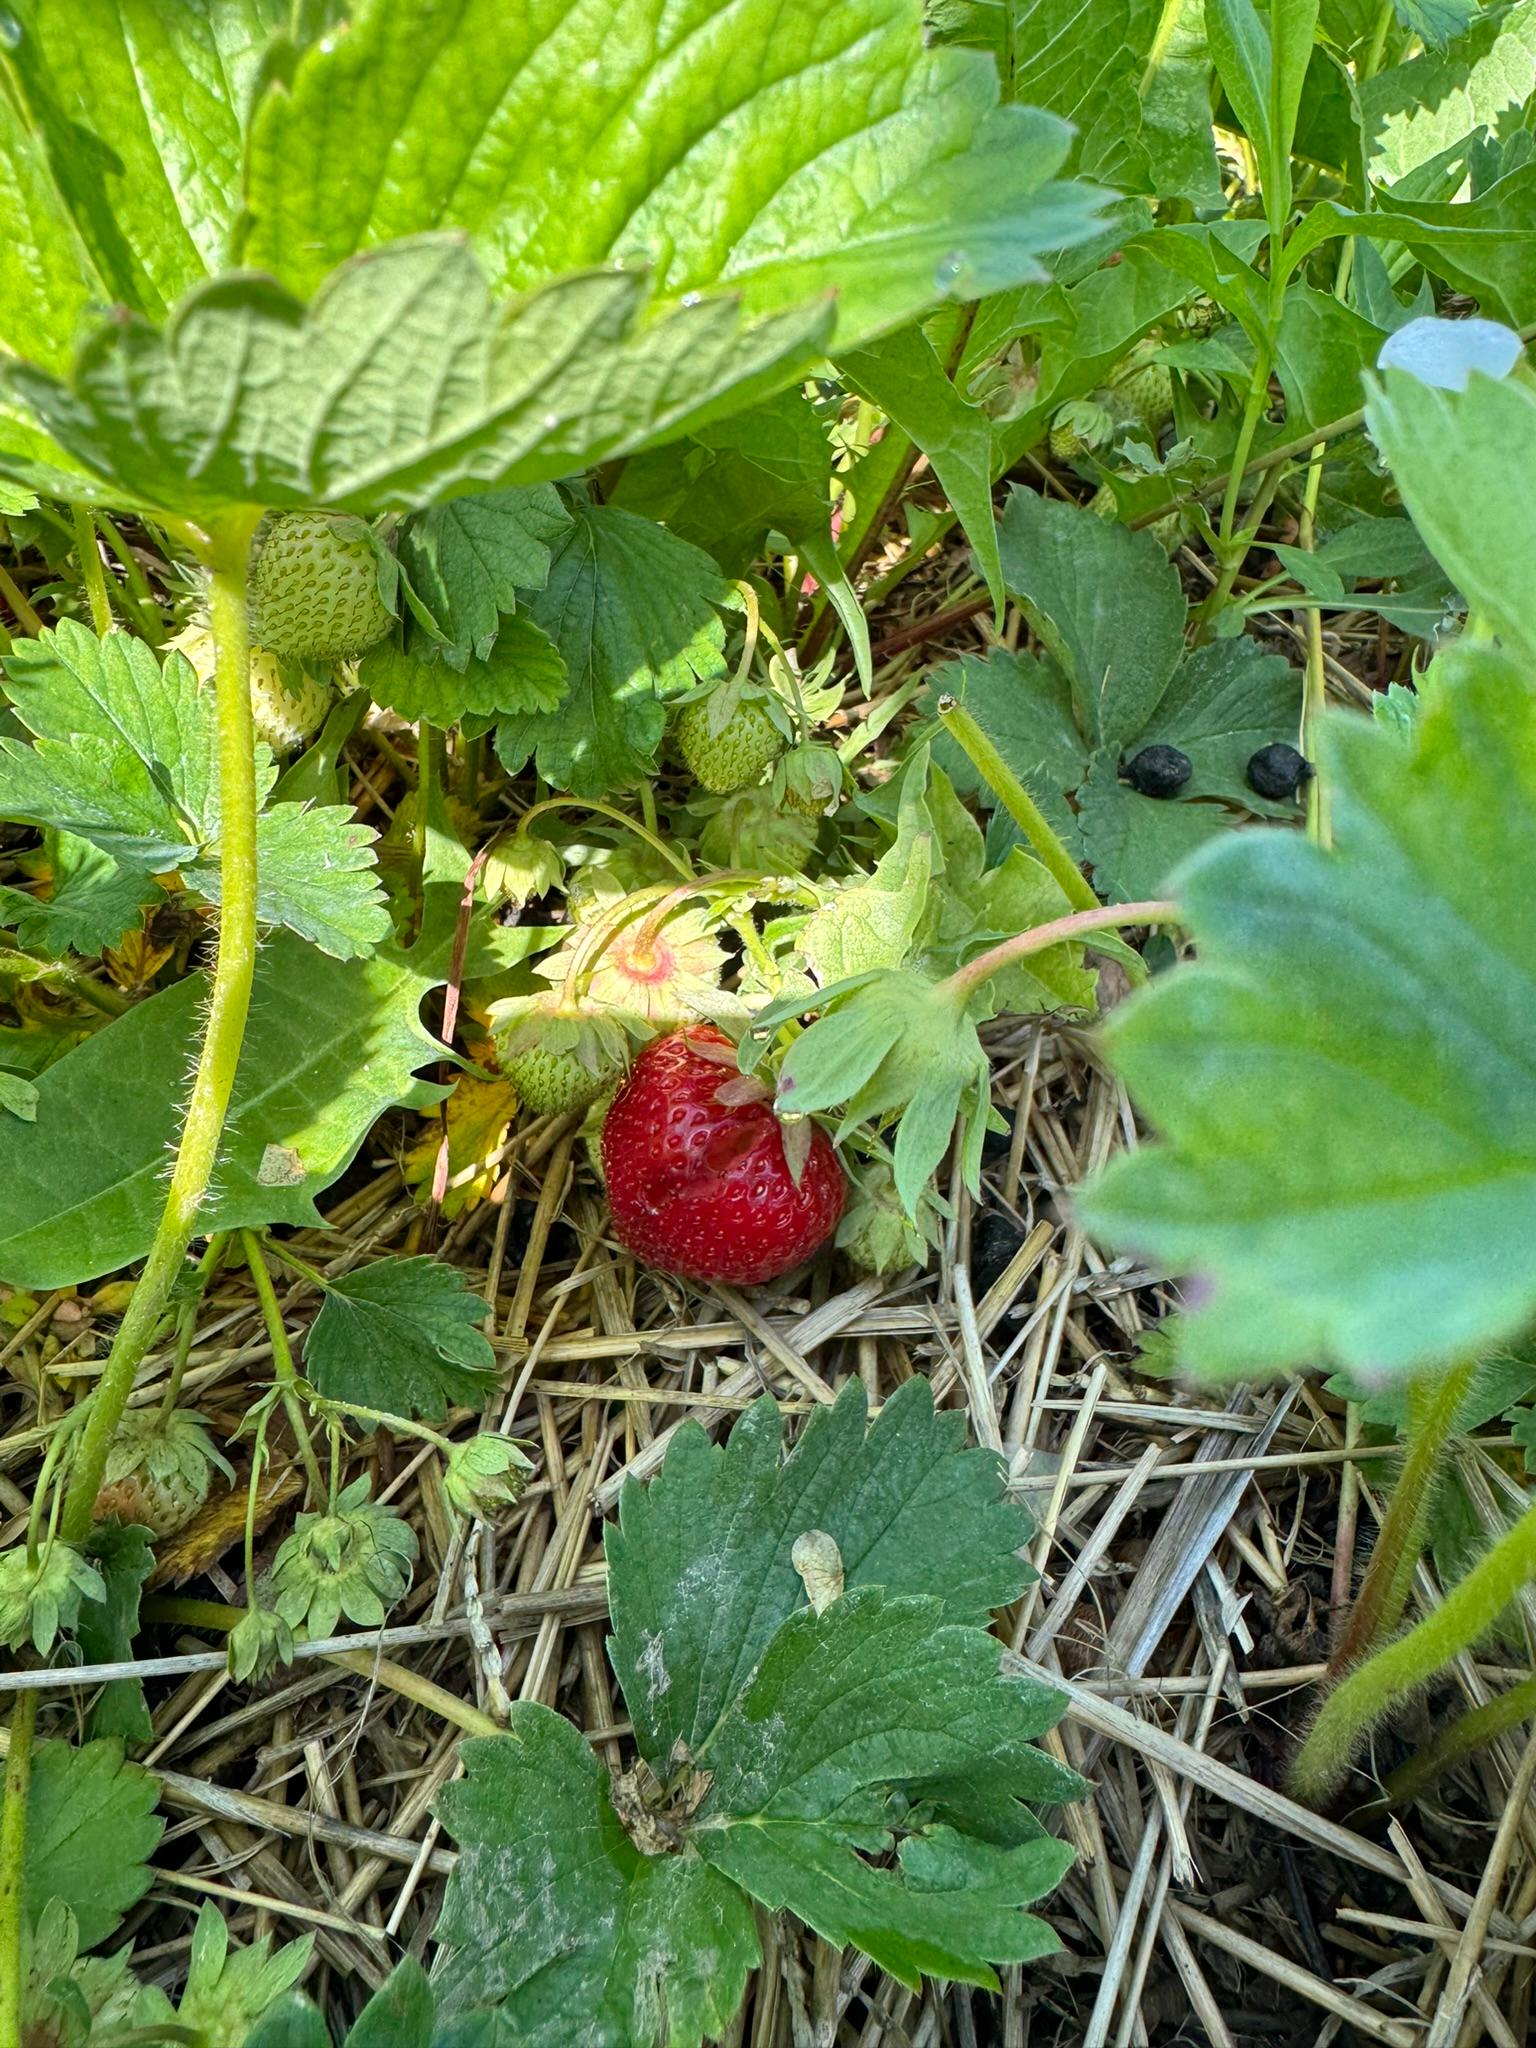 Strawberries growing from a bush.